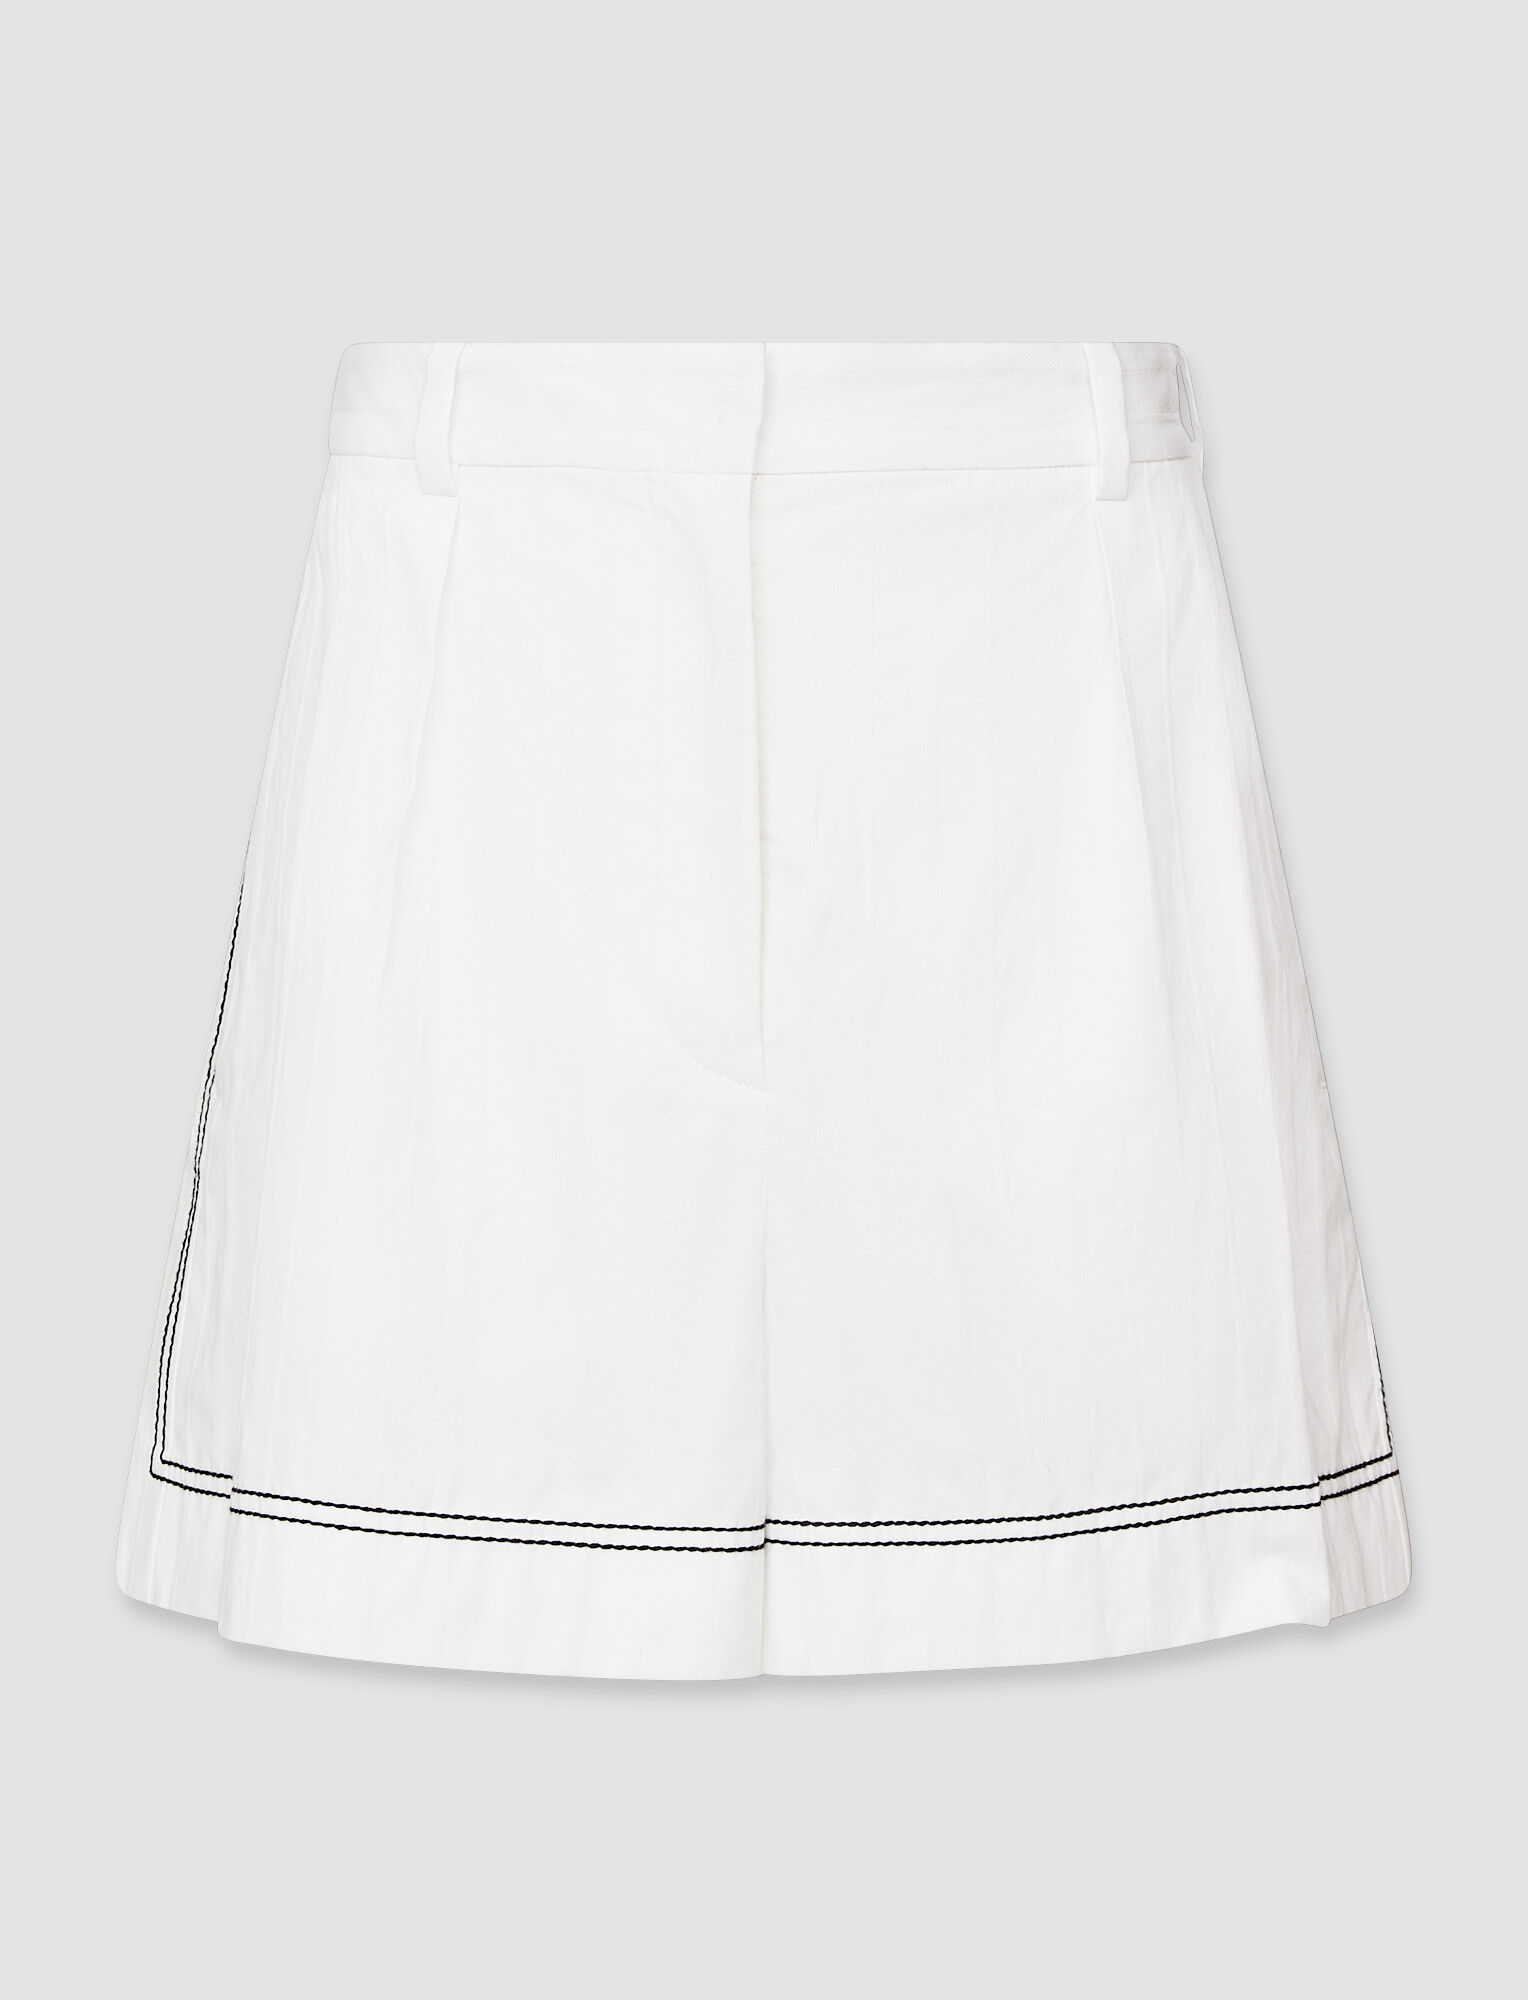 Joseph, Floral Cotton Riley Shorts, in Ivory